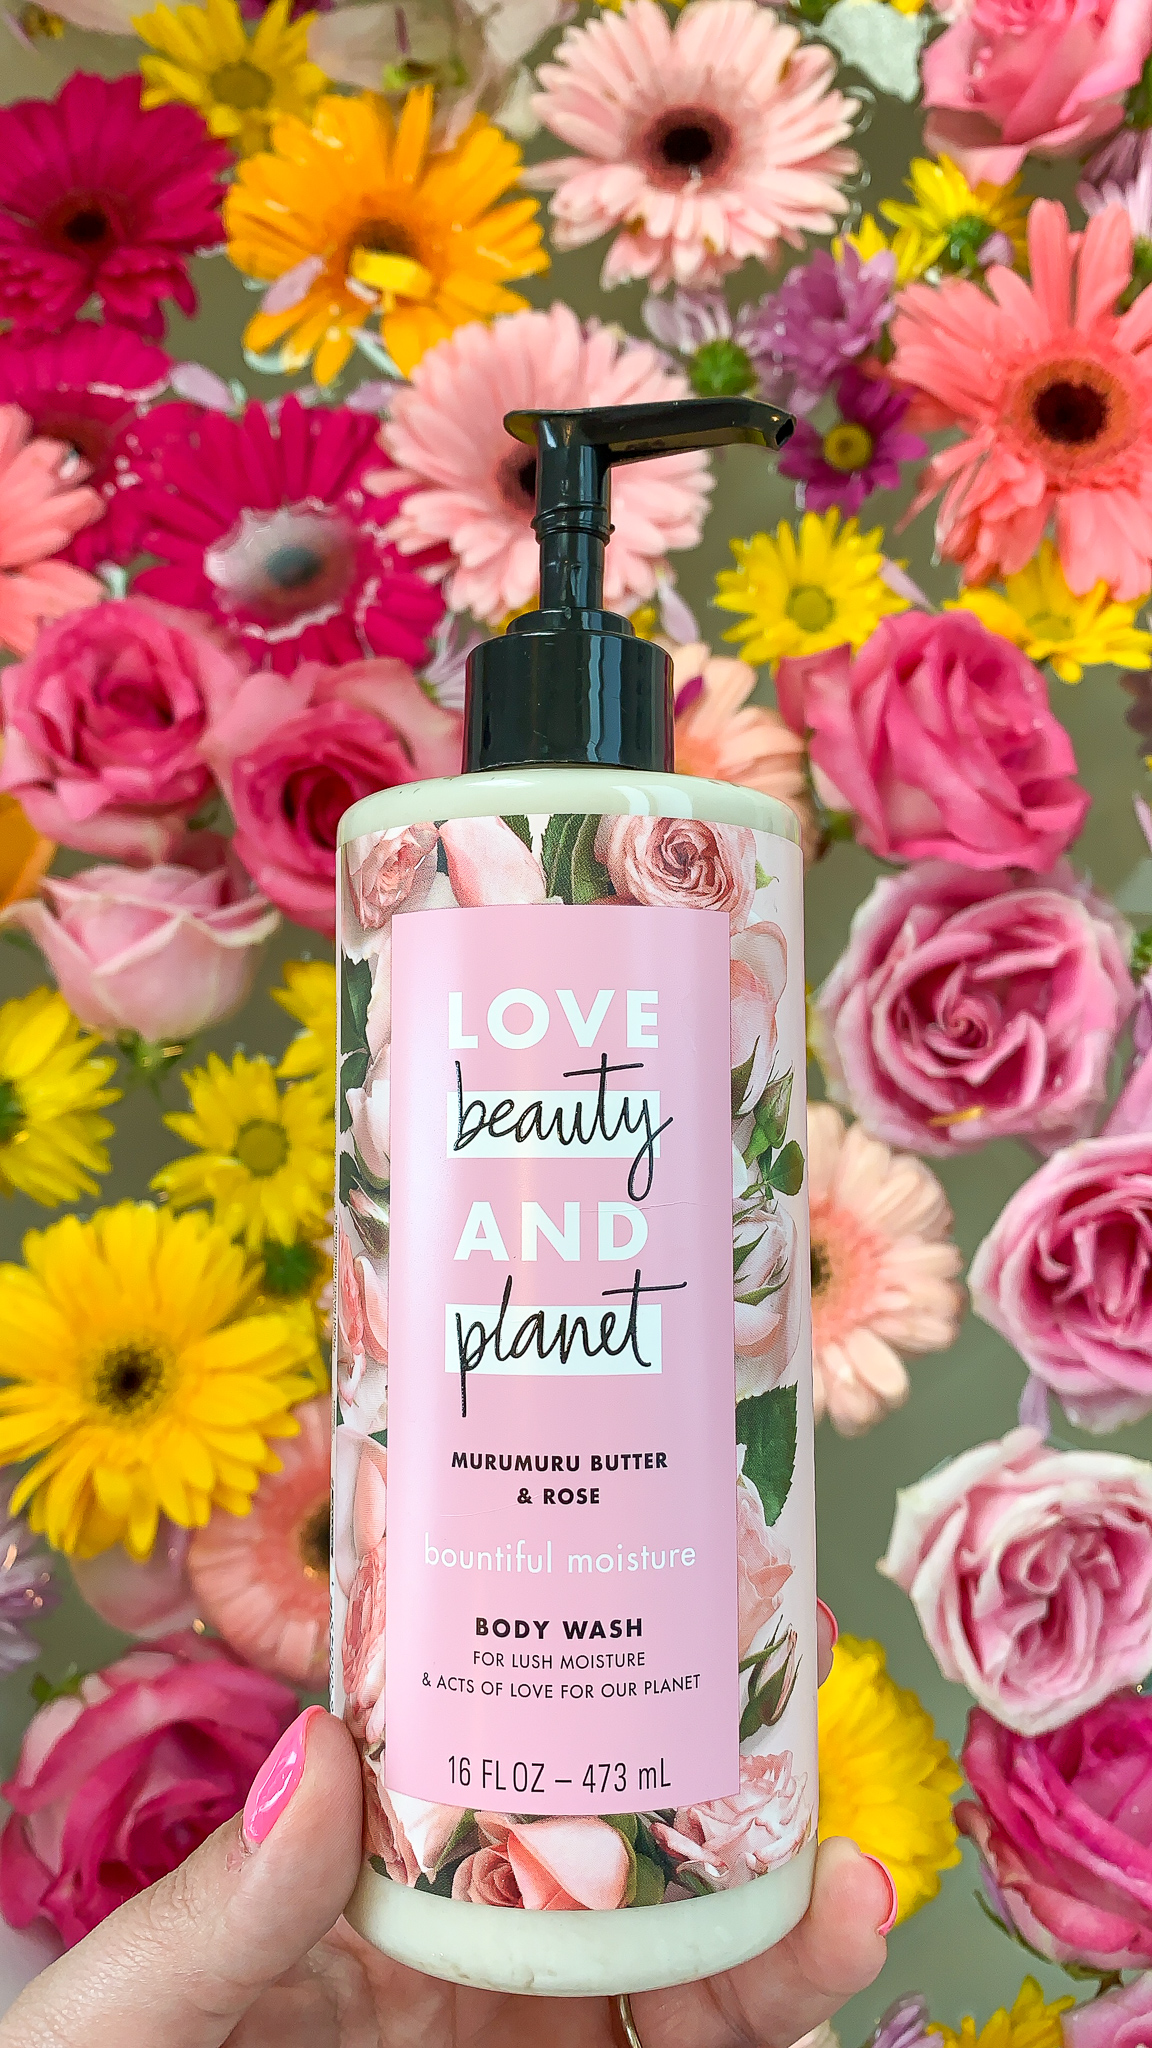 Earth Month Small Acts of Love - Love Beauty & Planet 5